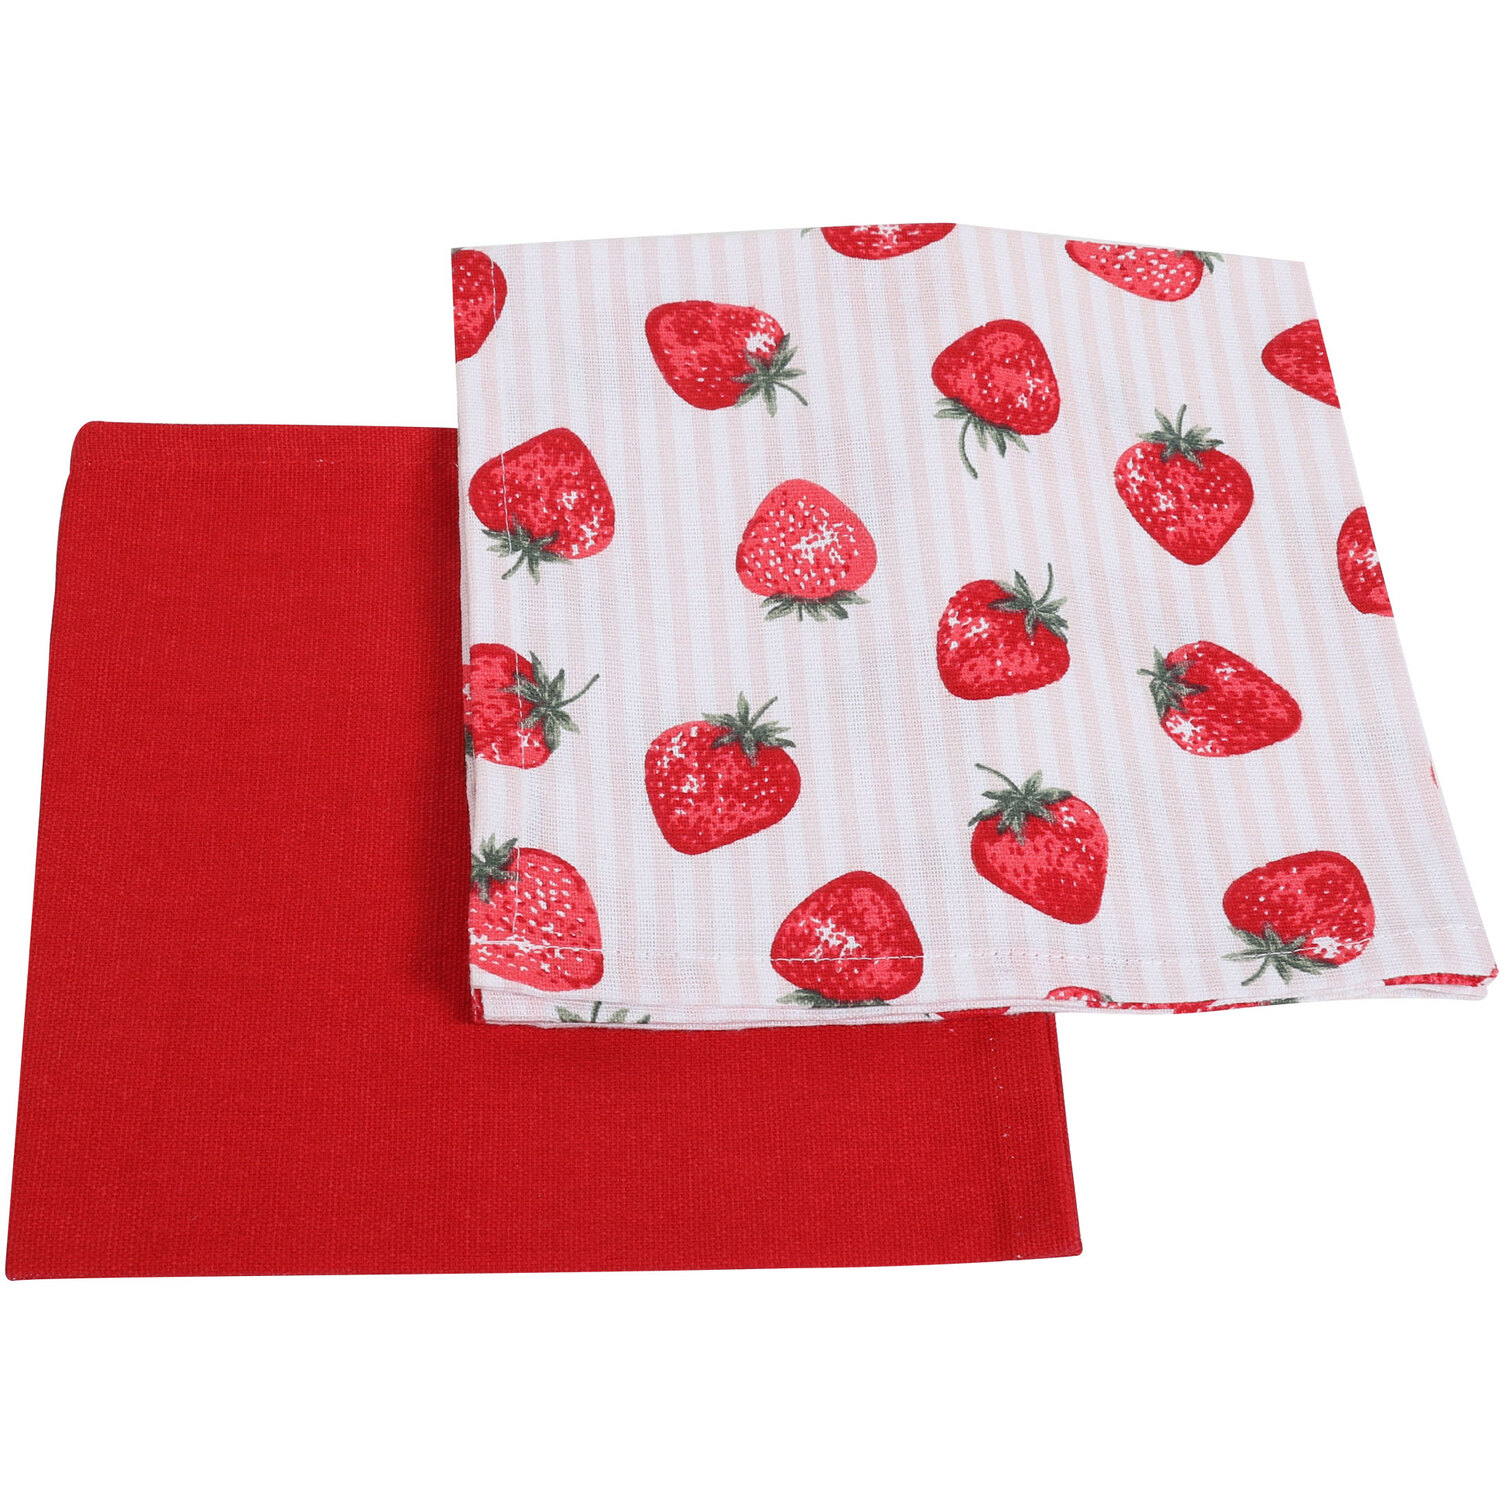 Pack of 2 Strawberry Napkins - Red Image 2